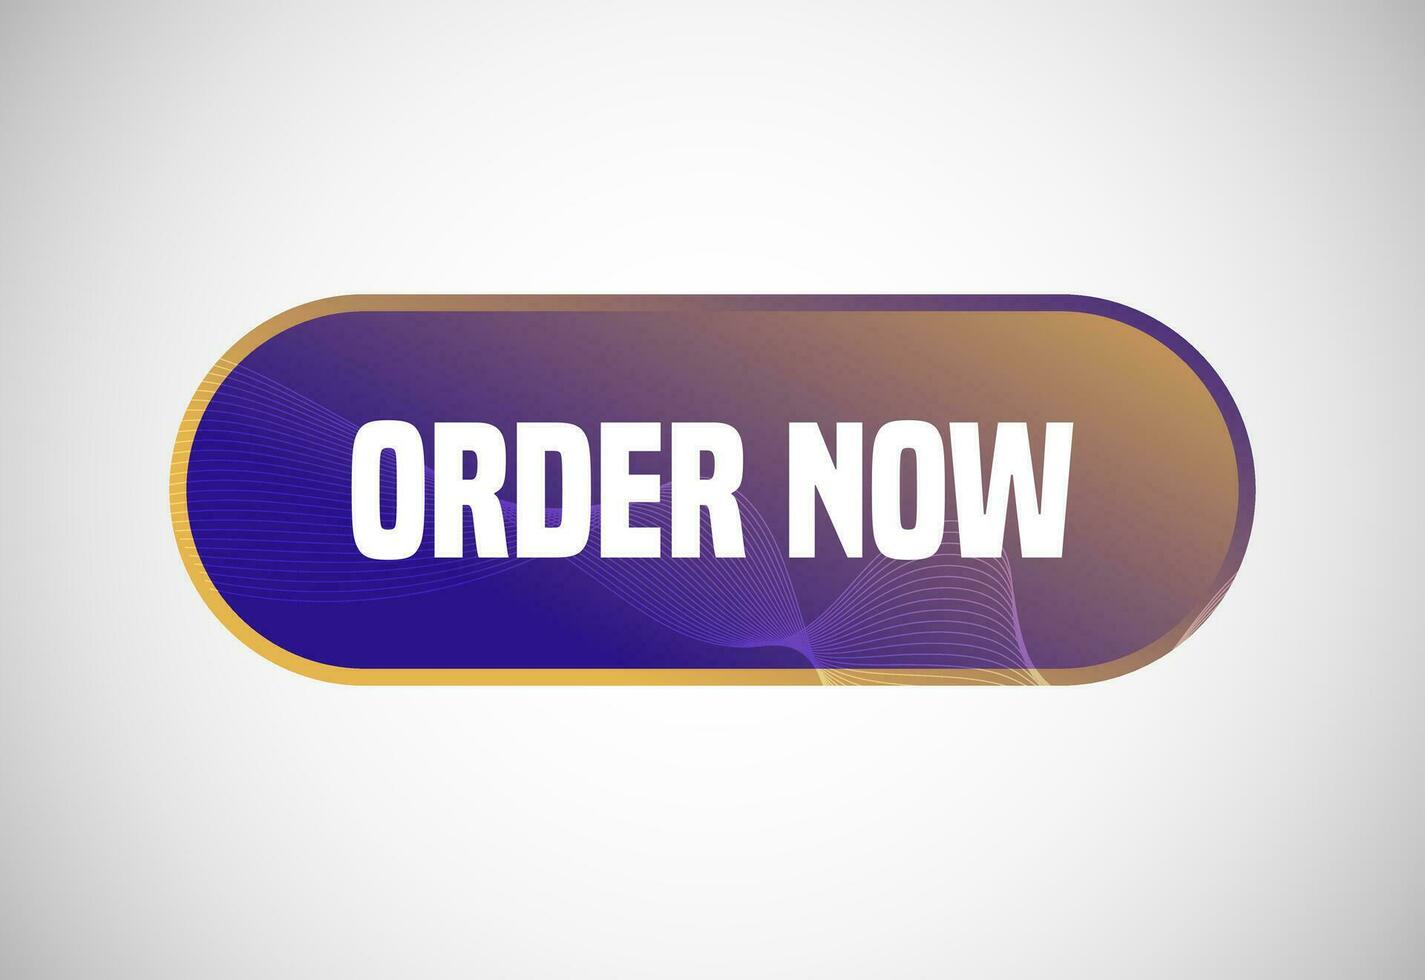 Order now button. Order now sign, key, push button, seal illustration design vector